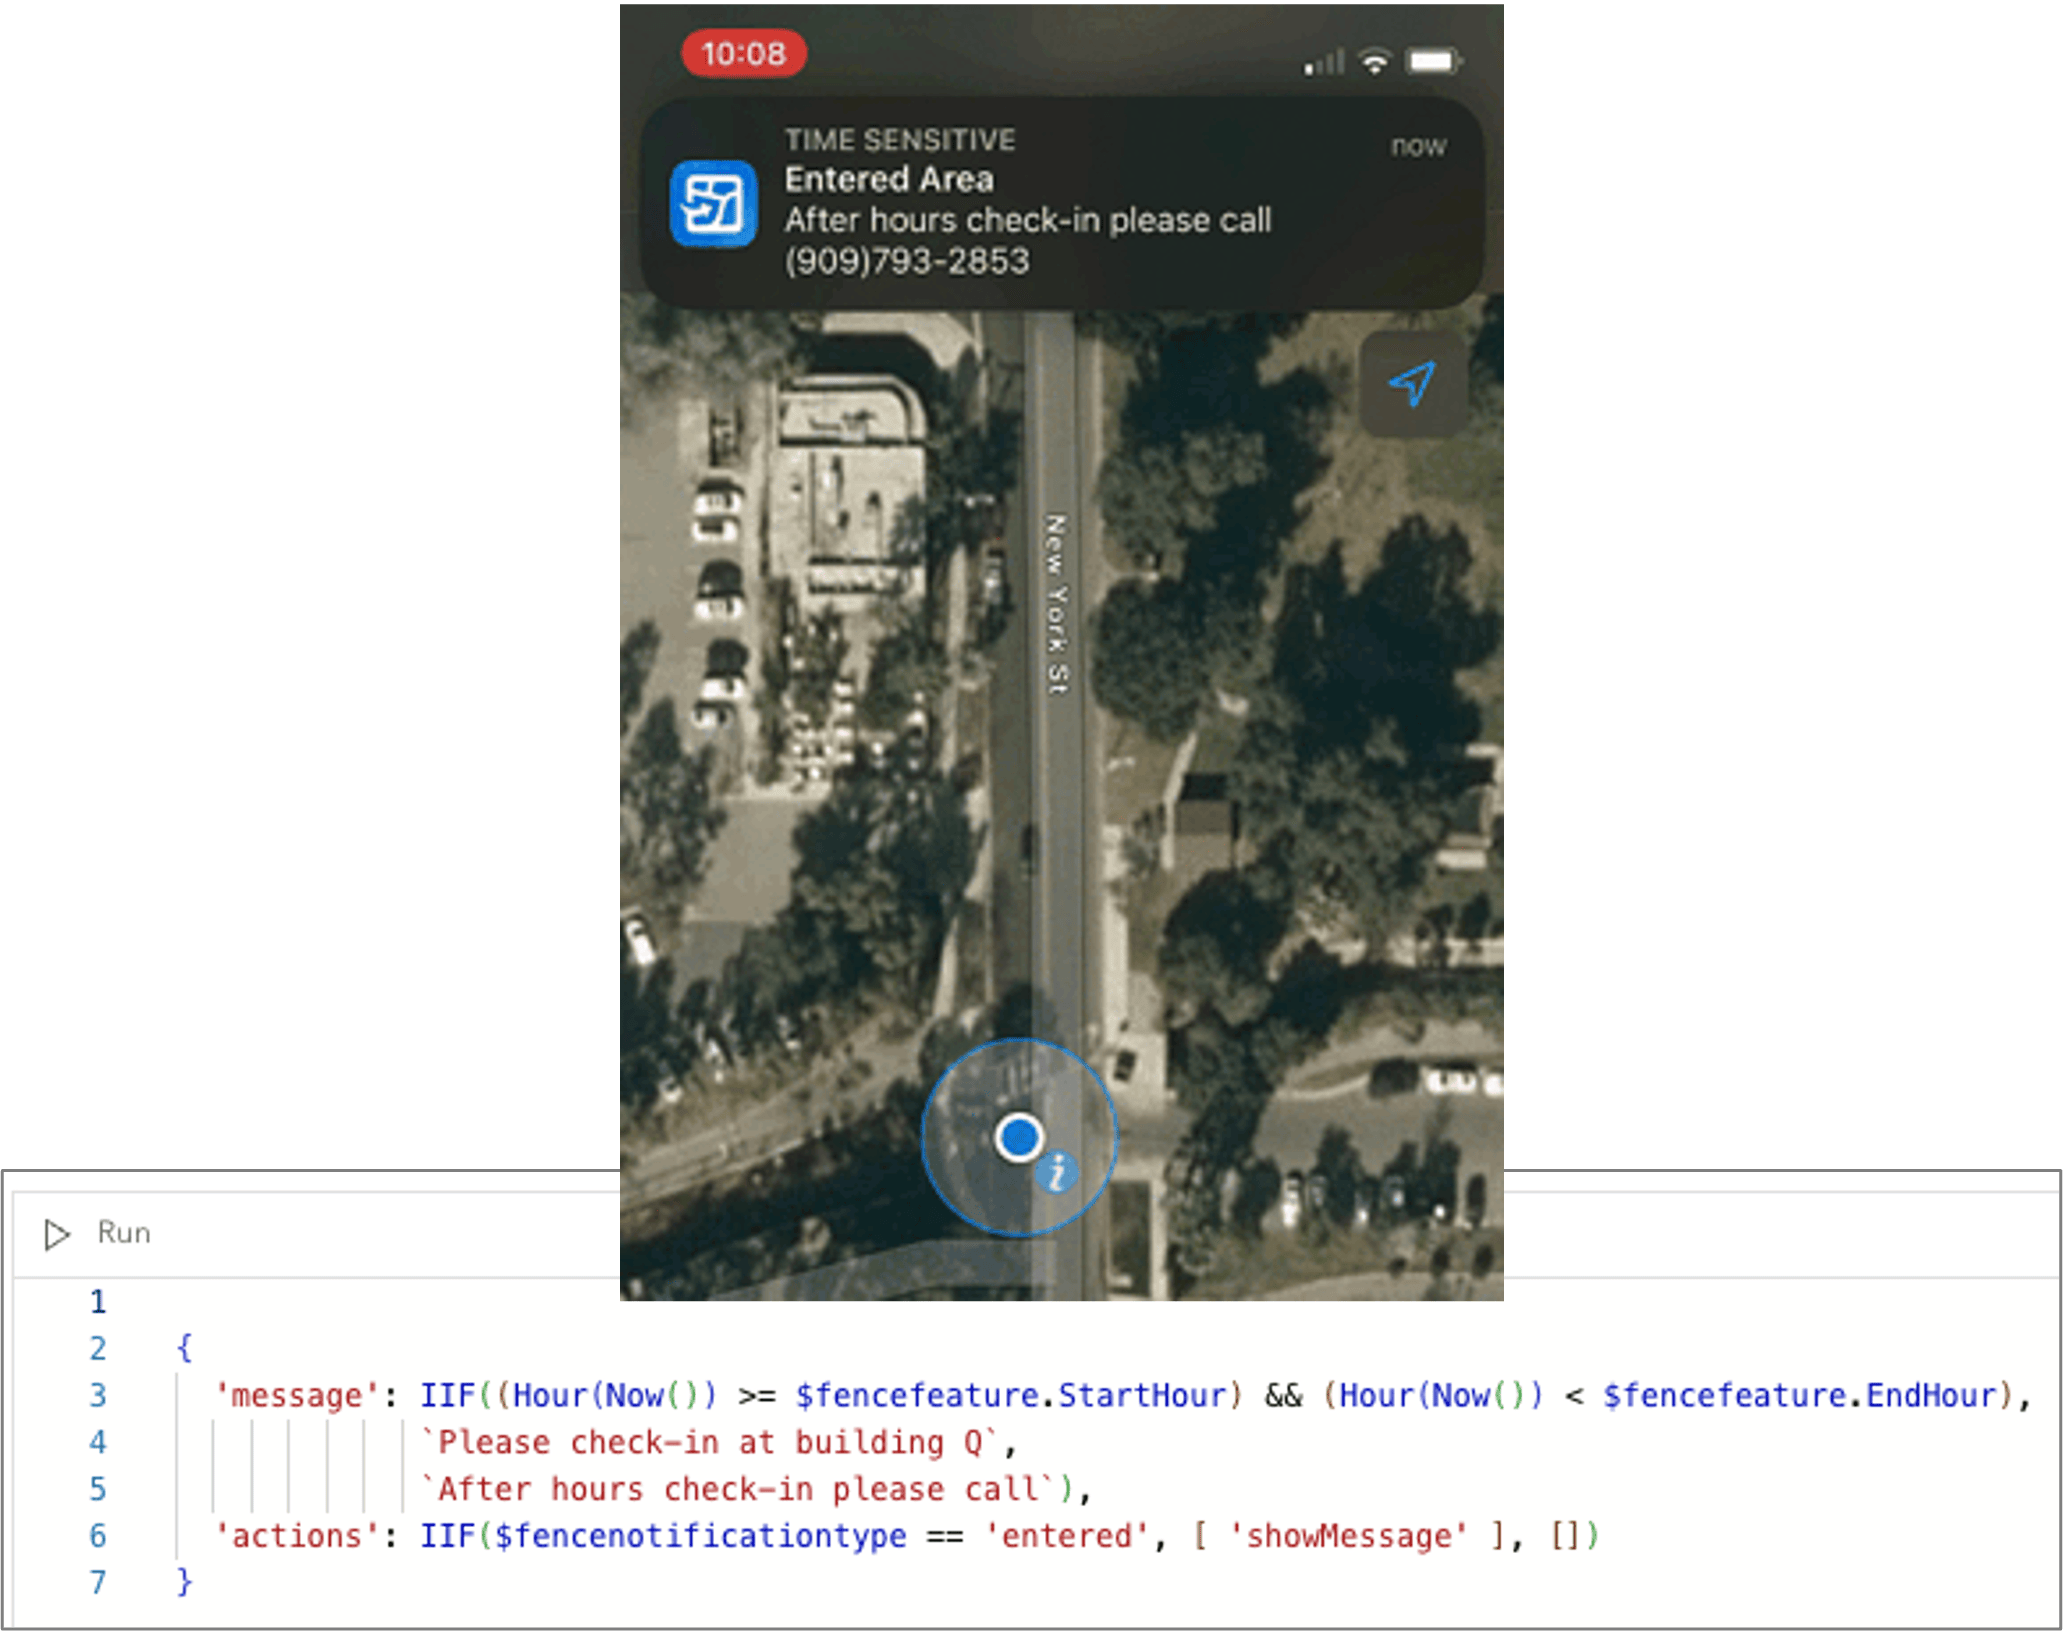 Use Arcade expressions to direct Geofence messages.